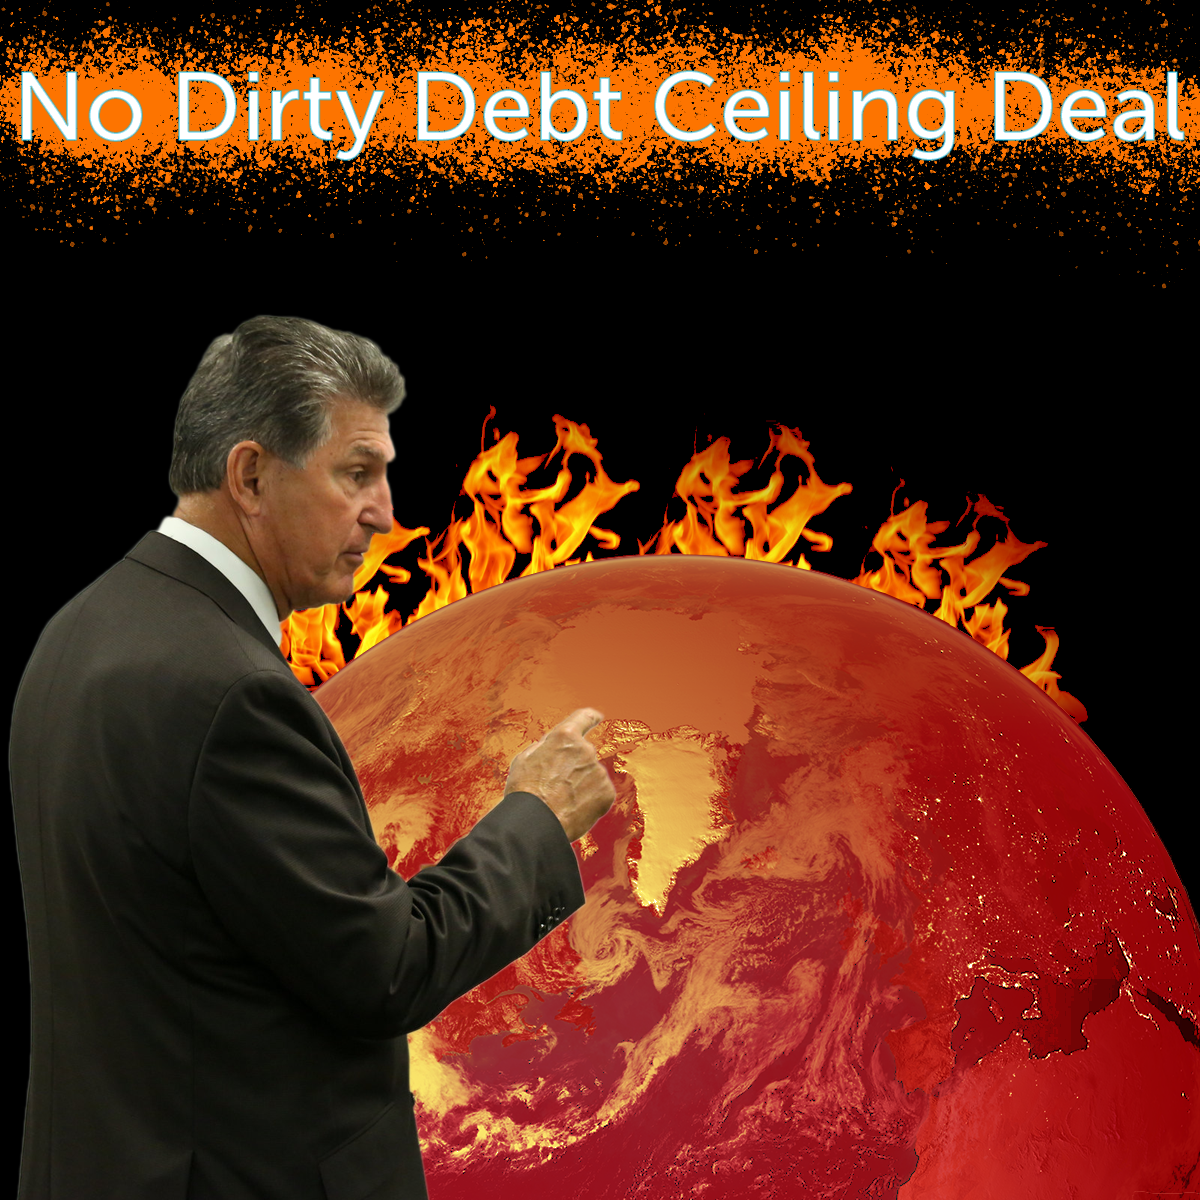 Sign now to stop Manchin's dirty debt ceiling deal